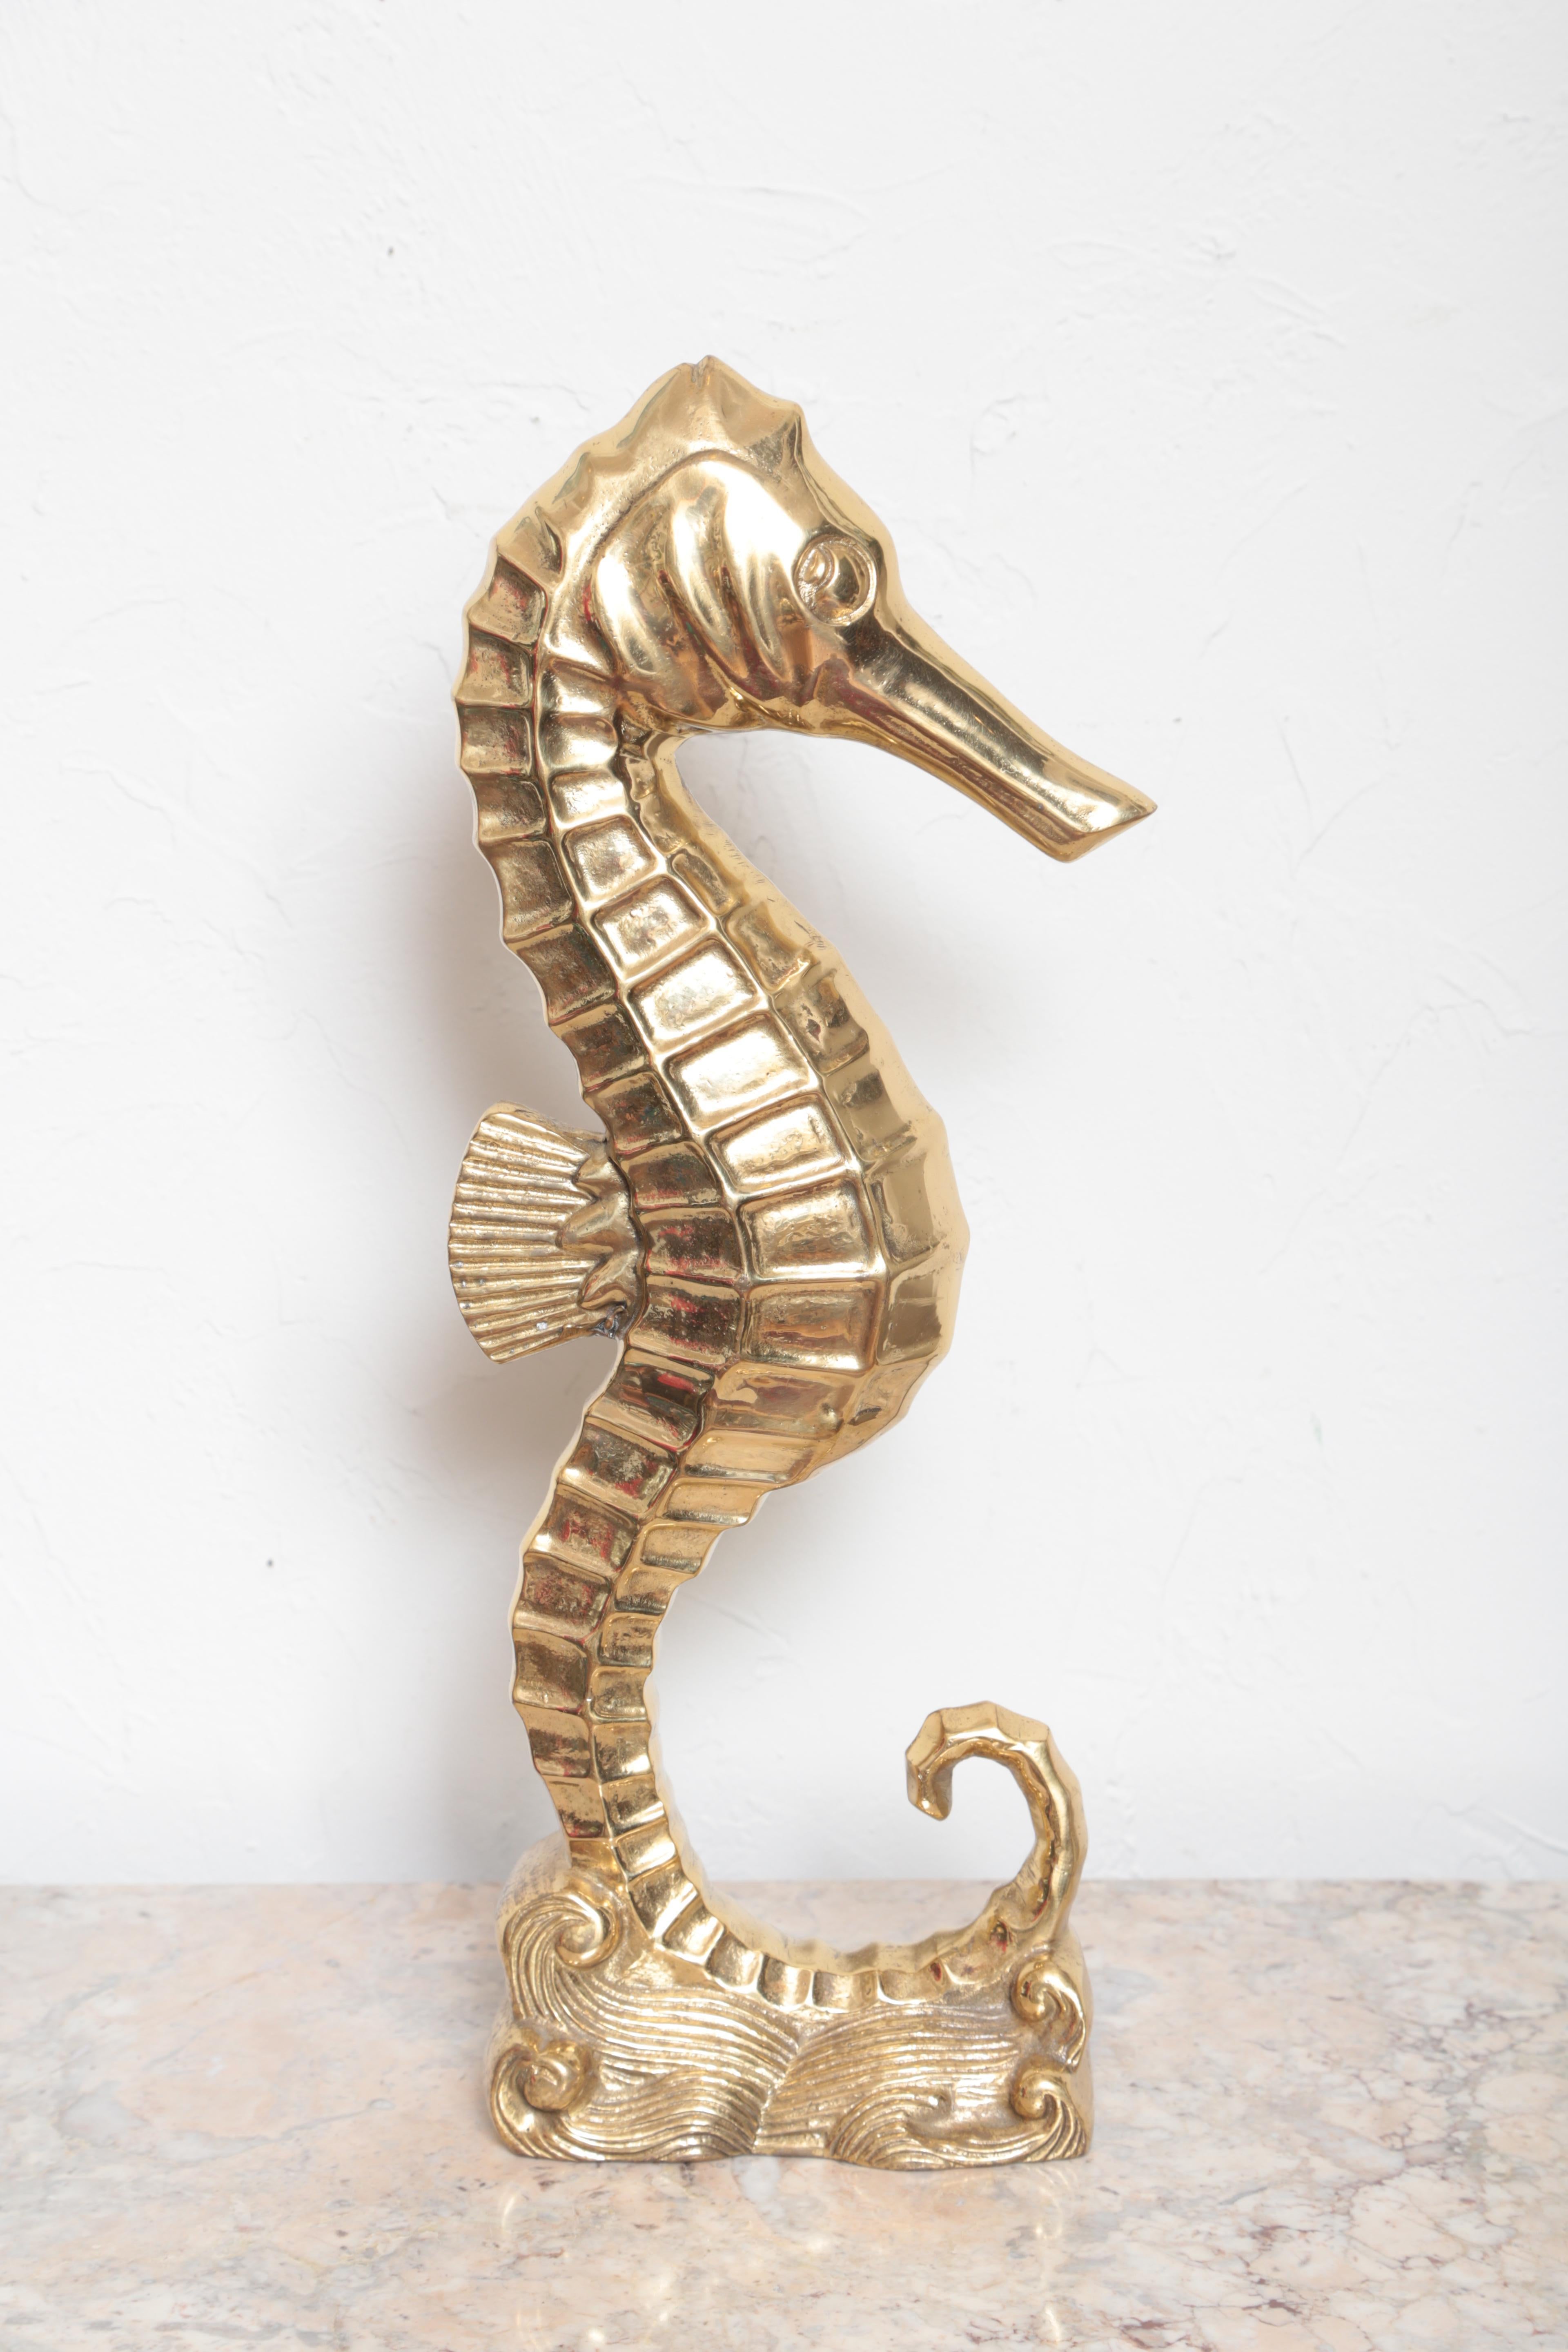 Details about   Nautical Handmade Design Brass Sea Horse Shaped Antique Style Door Handle CA05 